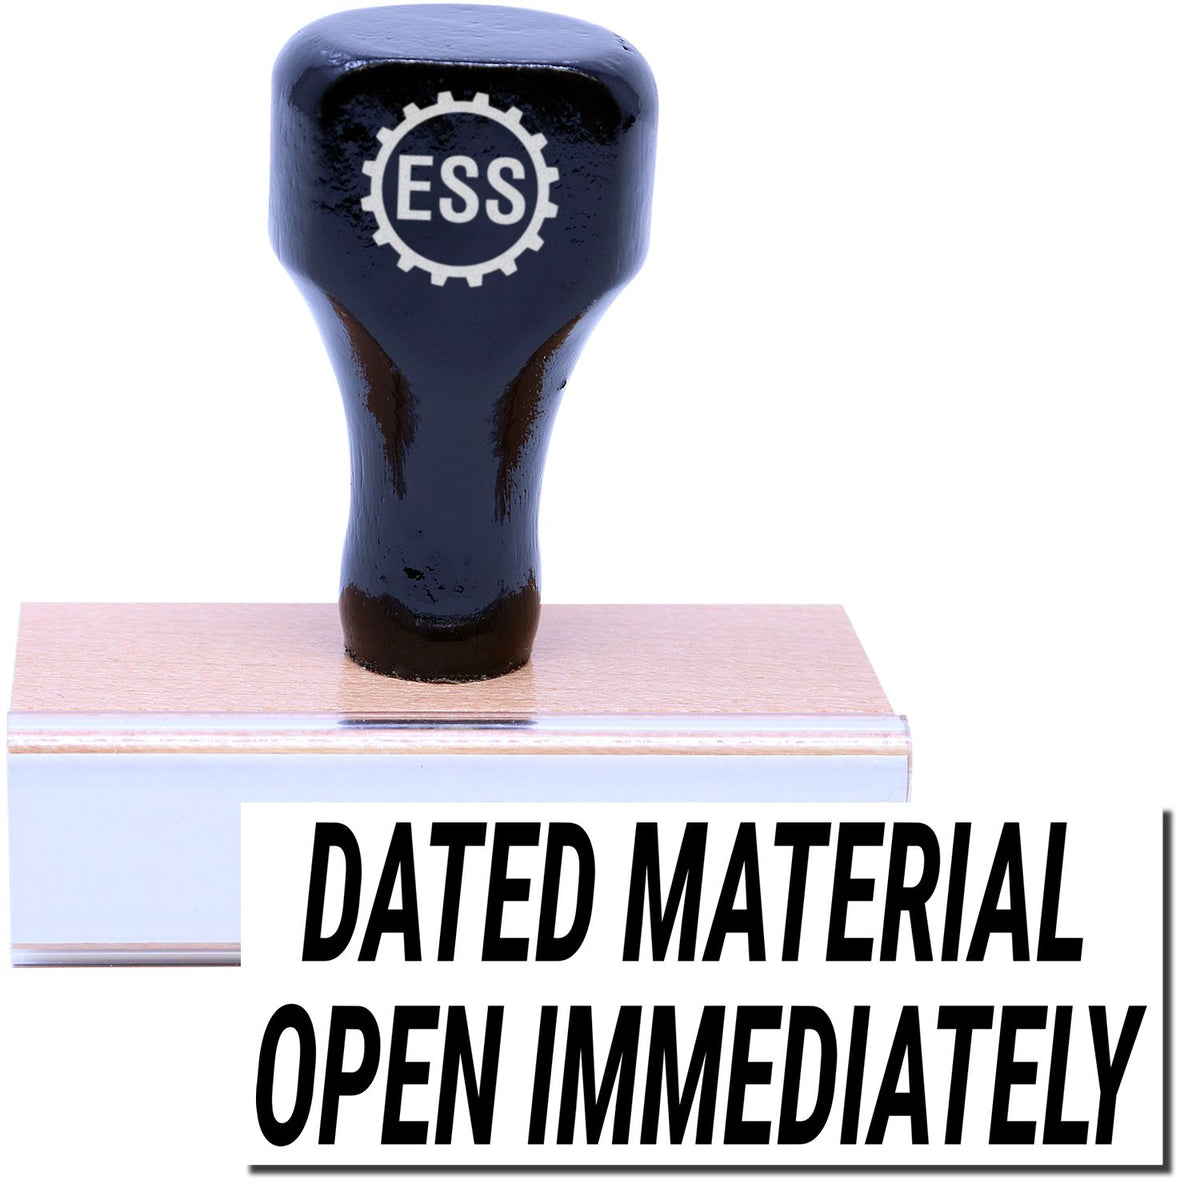 A stock office rubber stamp with a stamped image showing how the text &quot;DATED MATERIAL OPEN IMMEDIATELY&quot; in a large font is displayed after stamping.